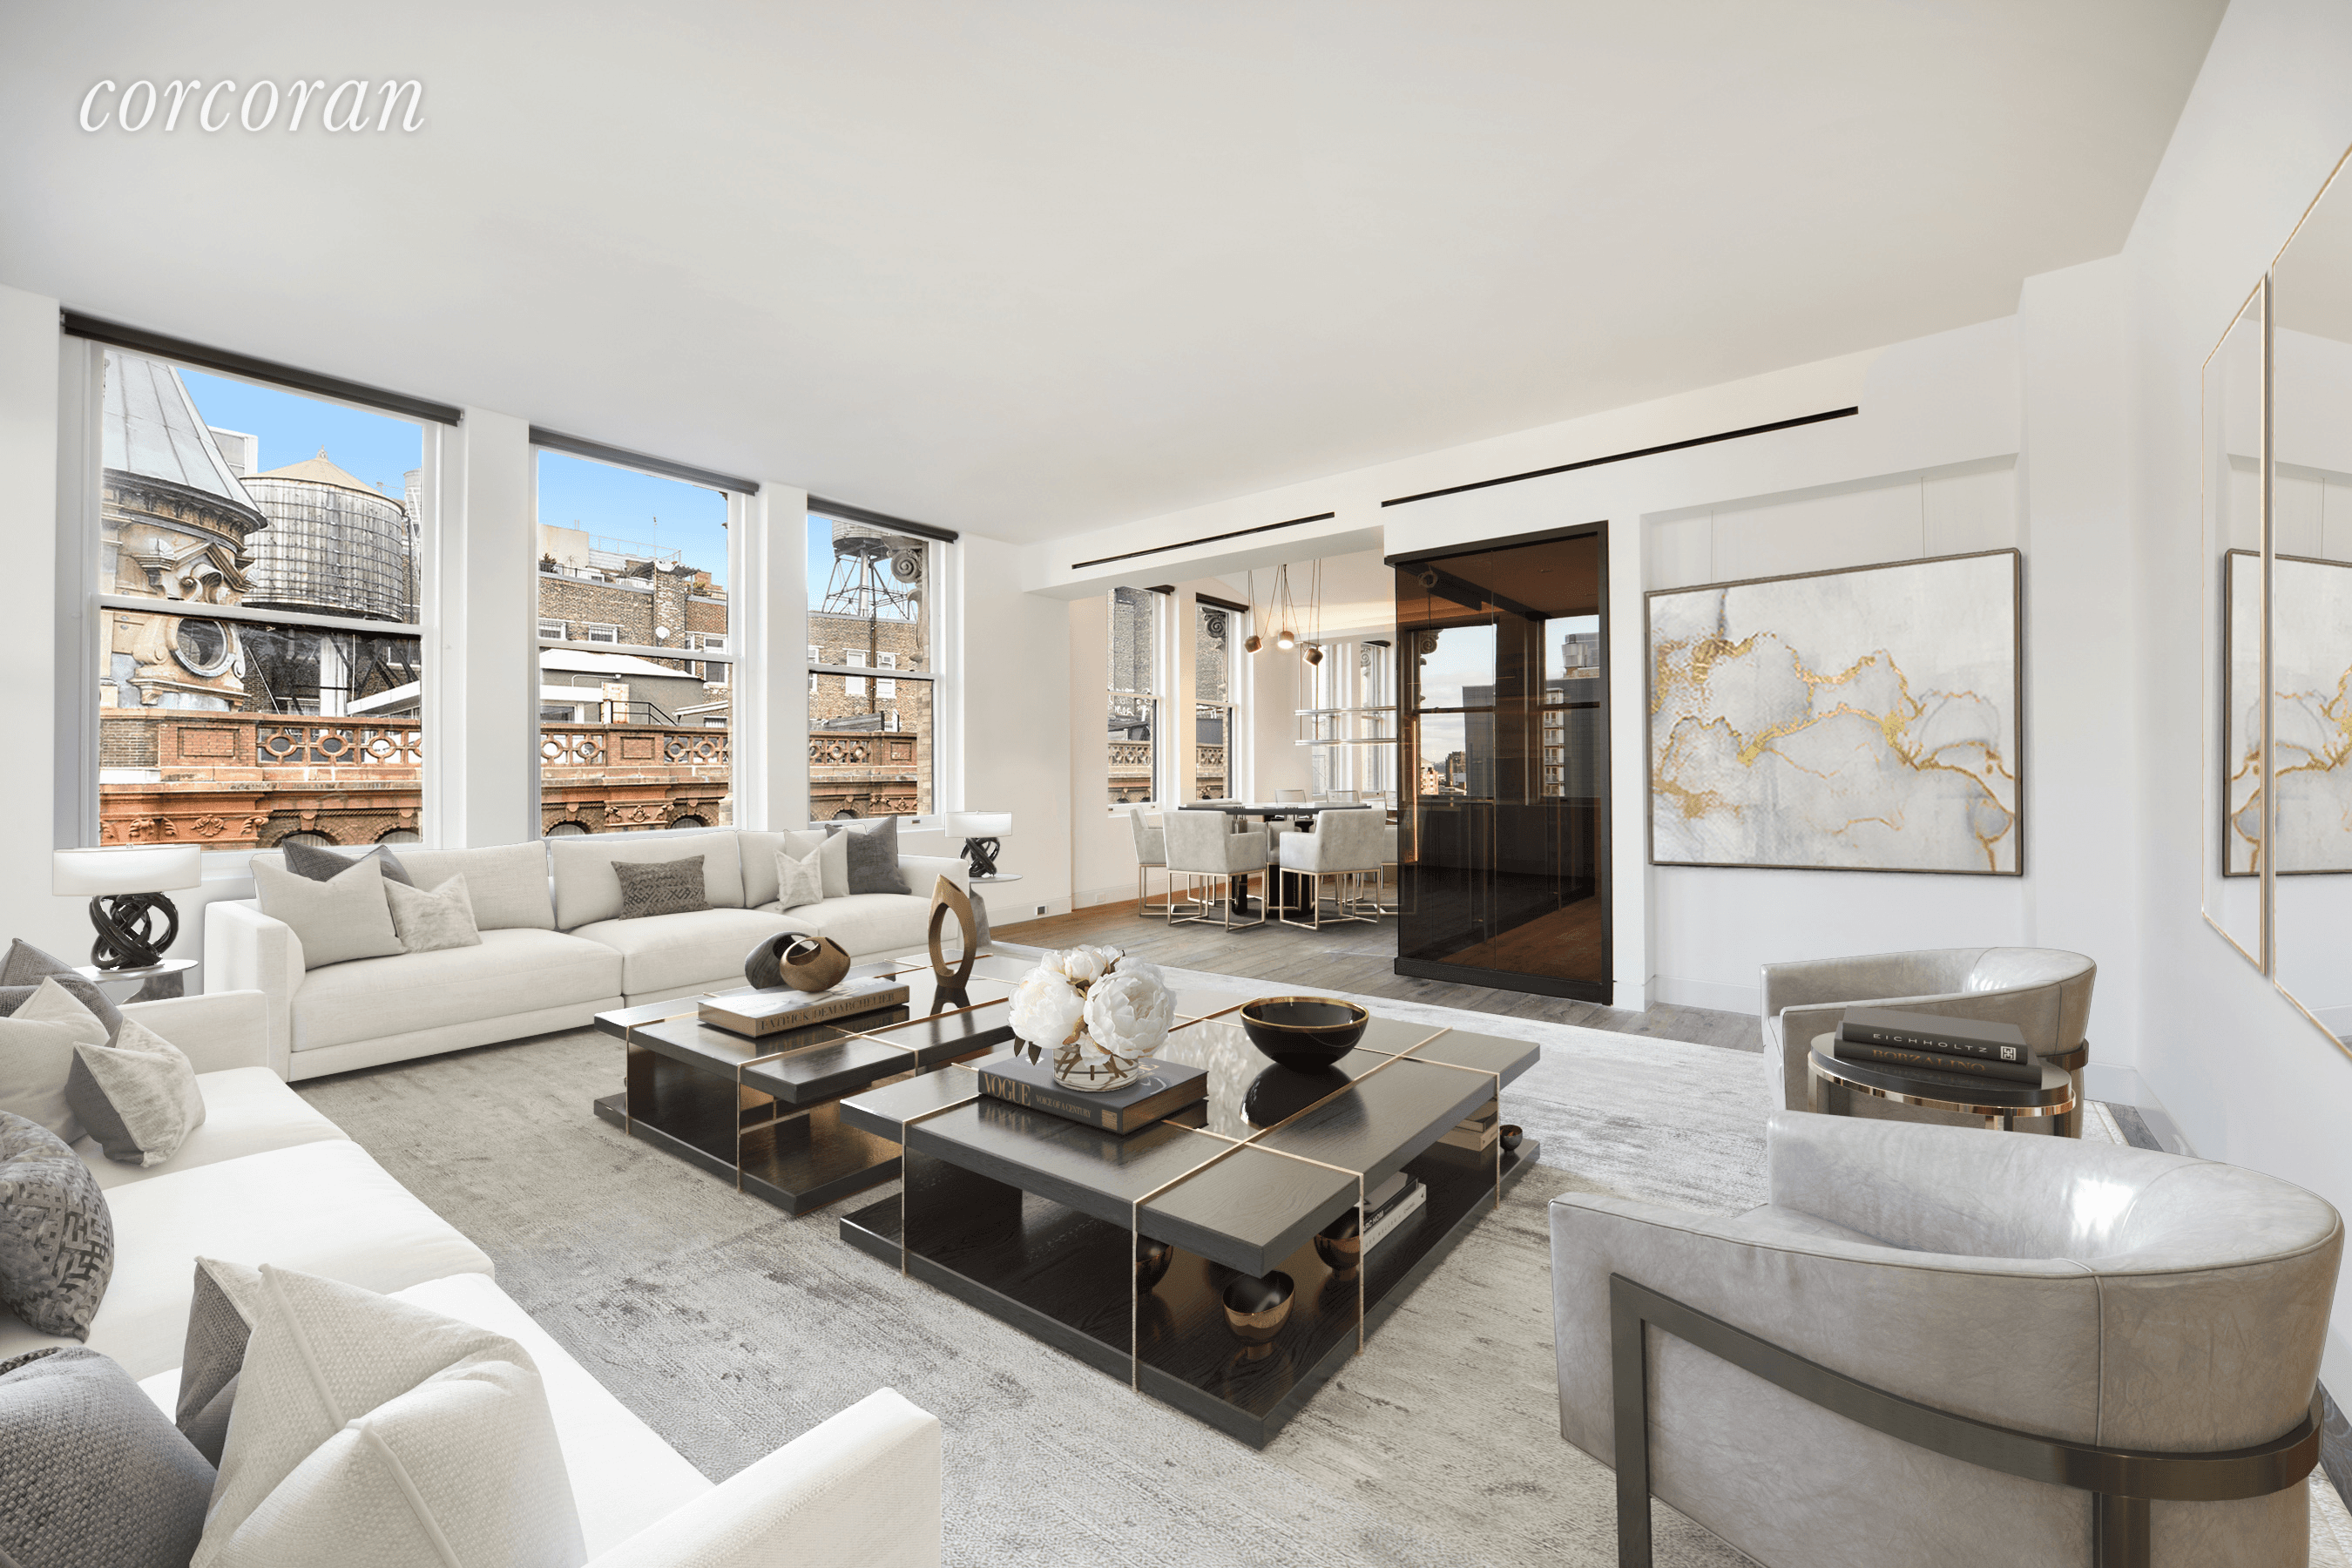 This newly renovated three bedroom, three bathroom penthouse loft blends luxurious, custom finishes with incredible, original details making this a one of a kind penthouse located in prime Noho.